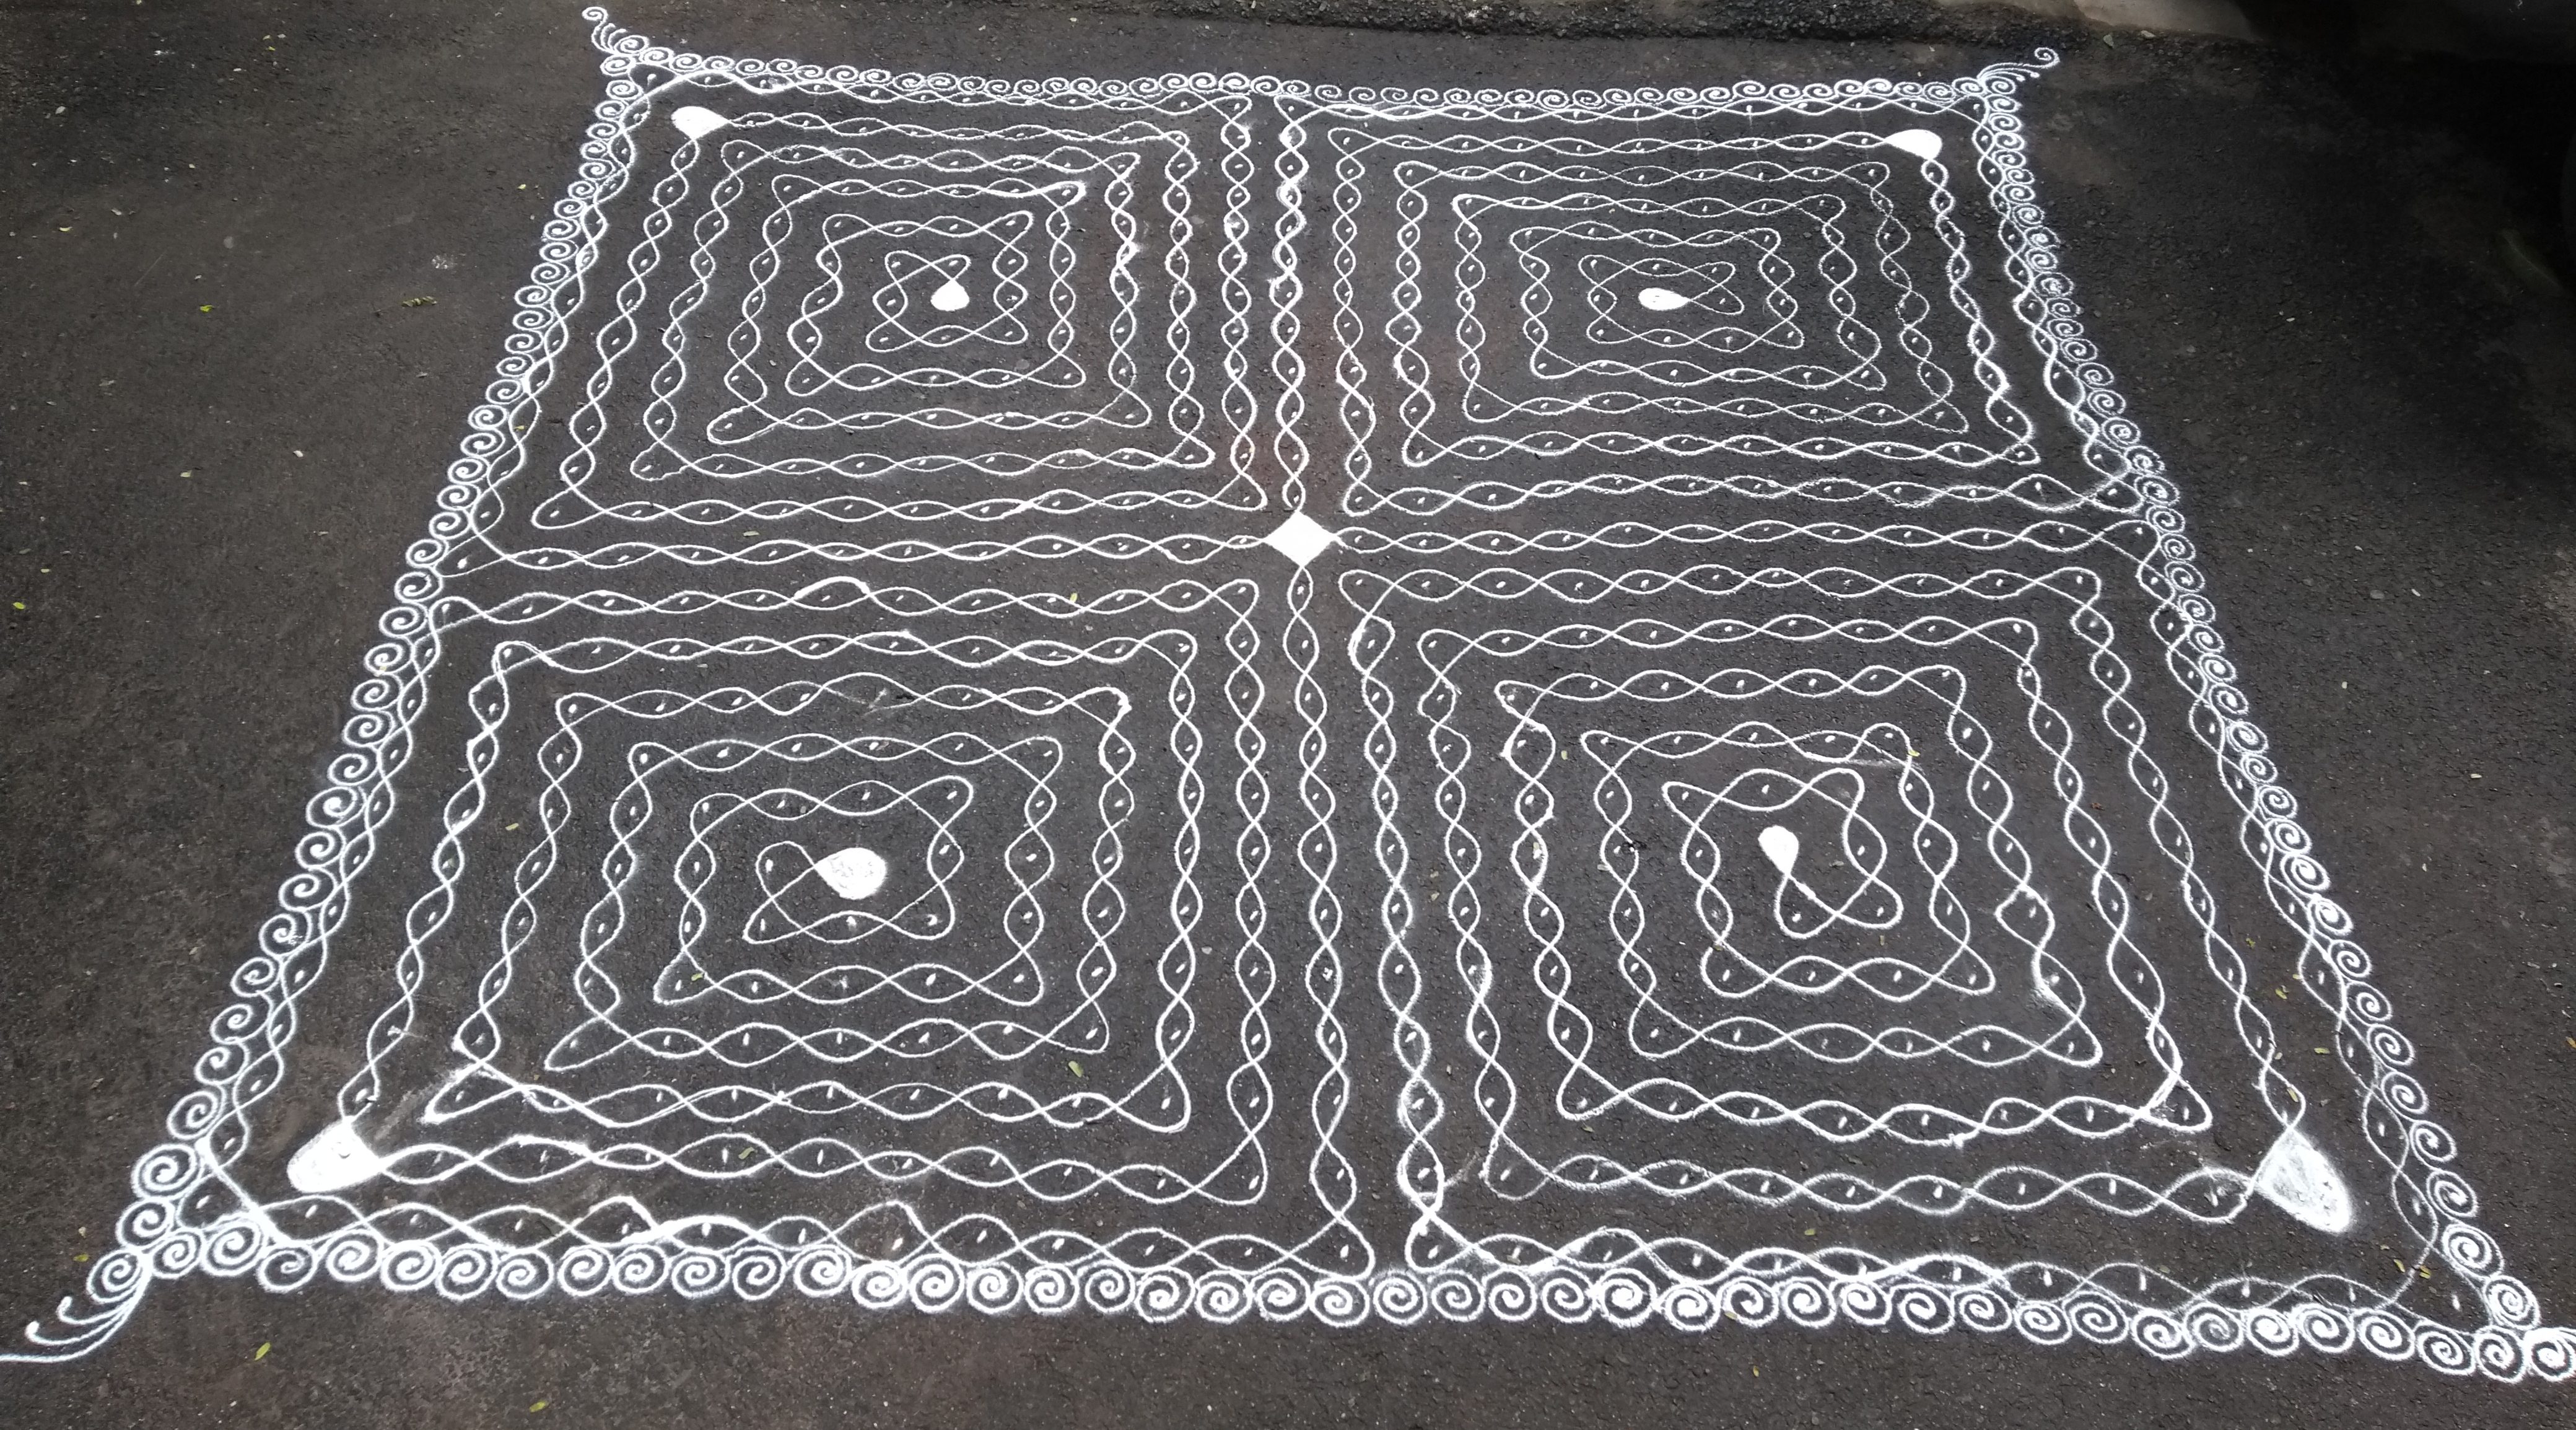 Innumerable knots || 25 dots sikku kolam for contest